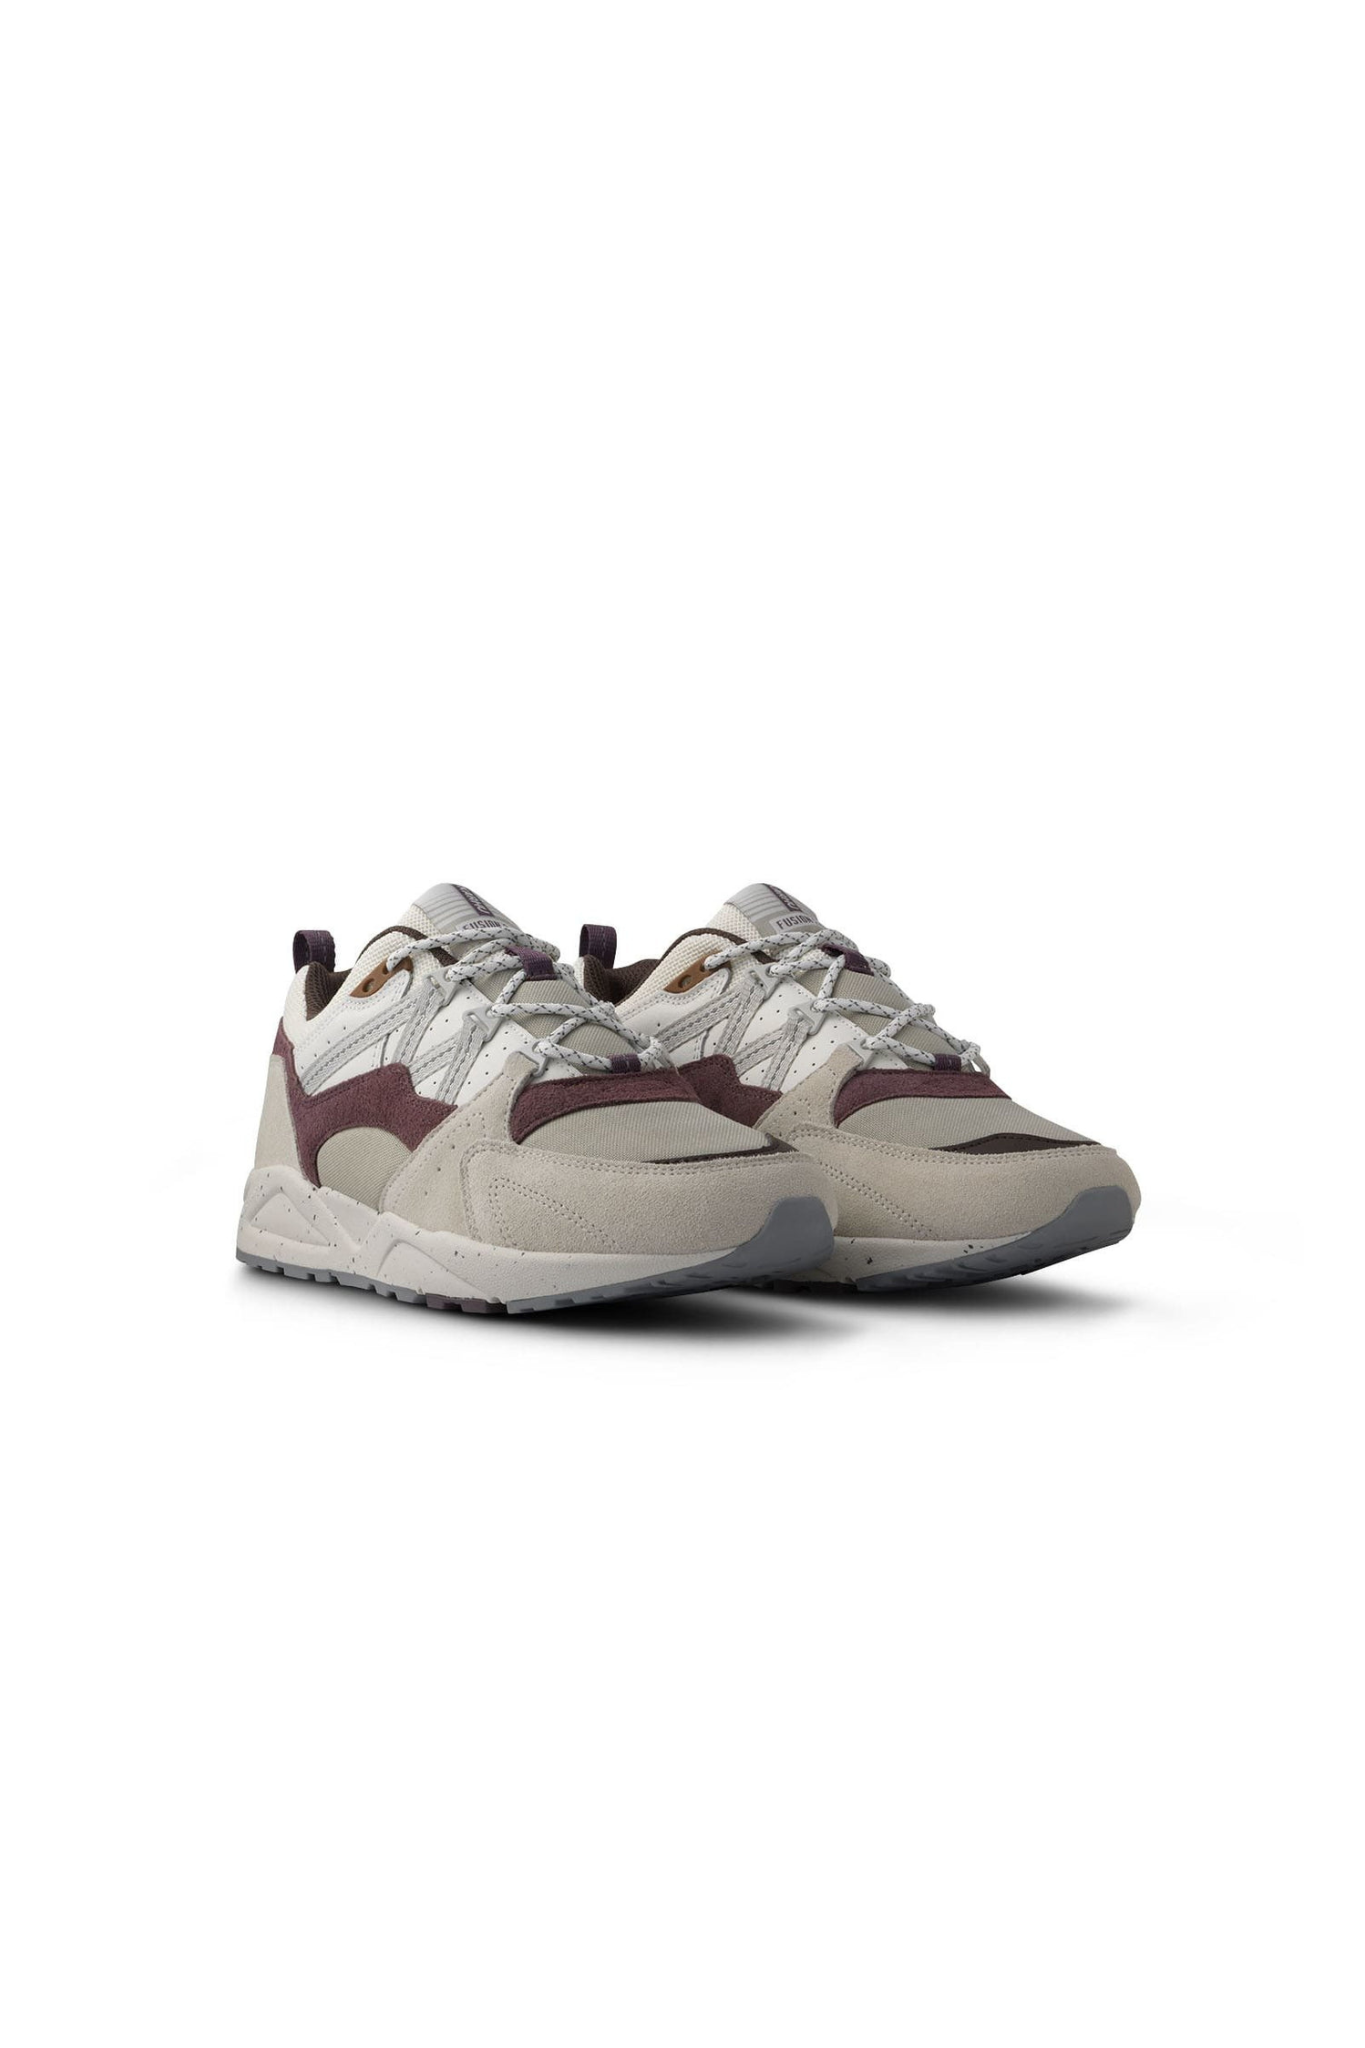 FUSION 2.0 WOMEN SNEAKERS - FOGGY DEW/MOONSCAPE